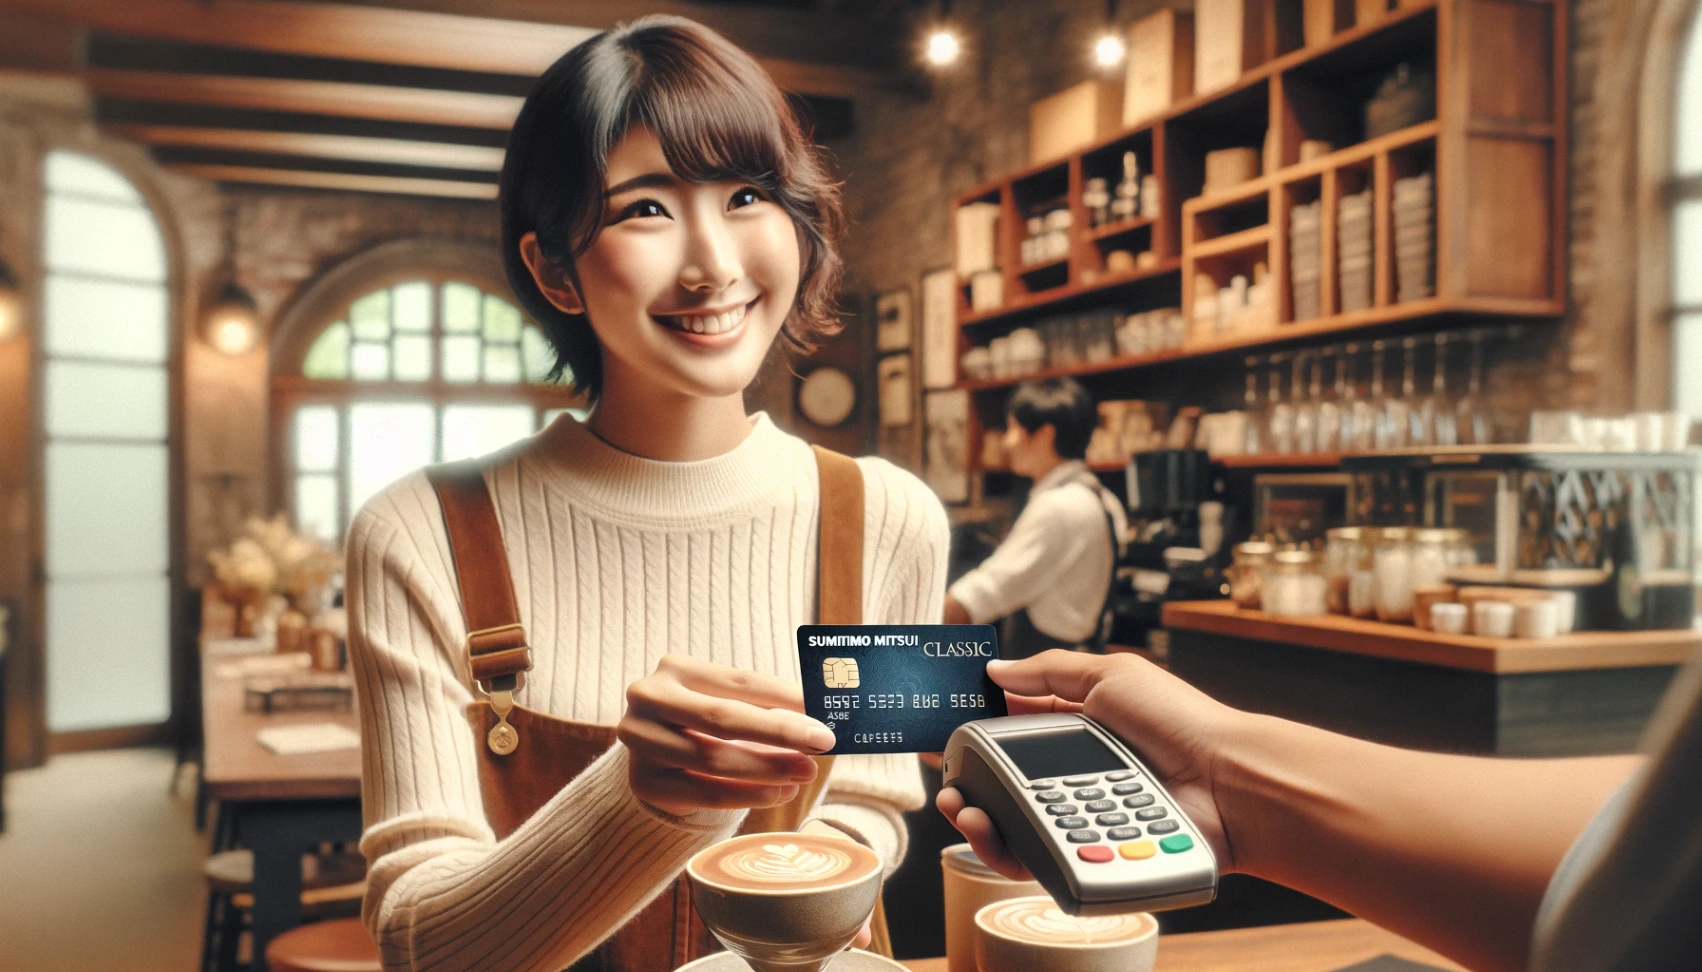 Sumitomo Mitsui Classic Card – Benefits and How to Easily Apply